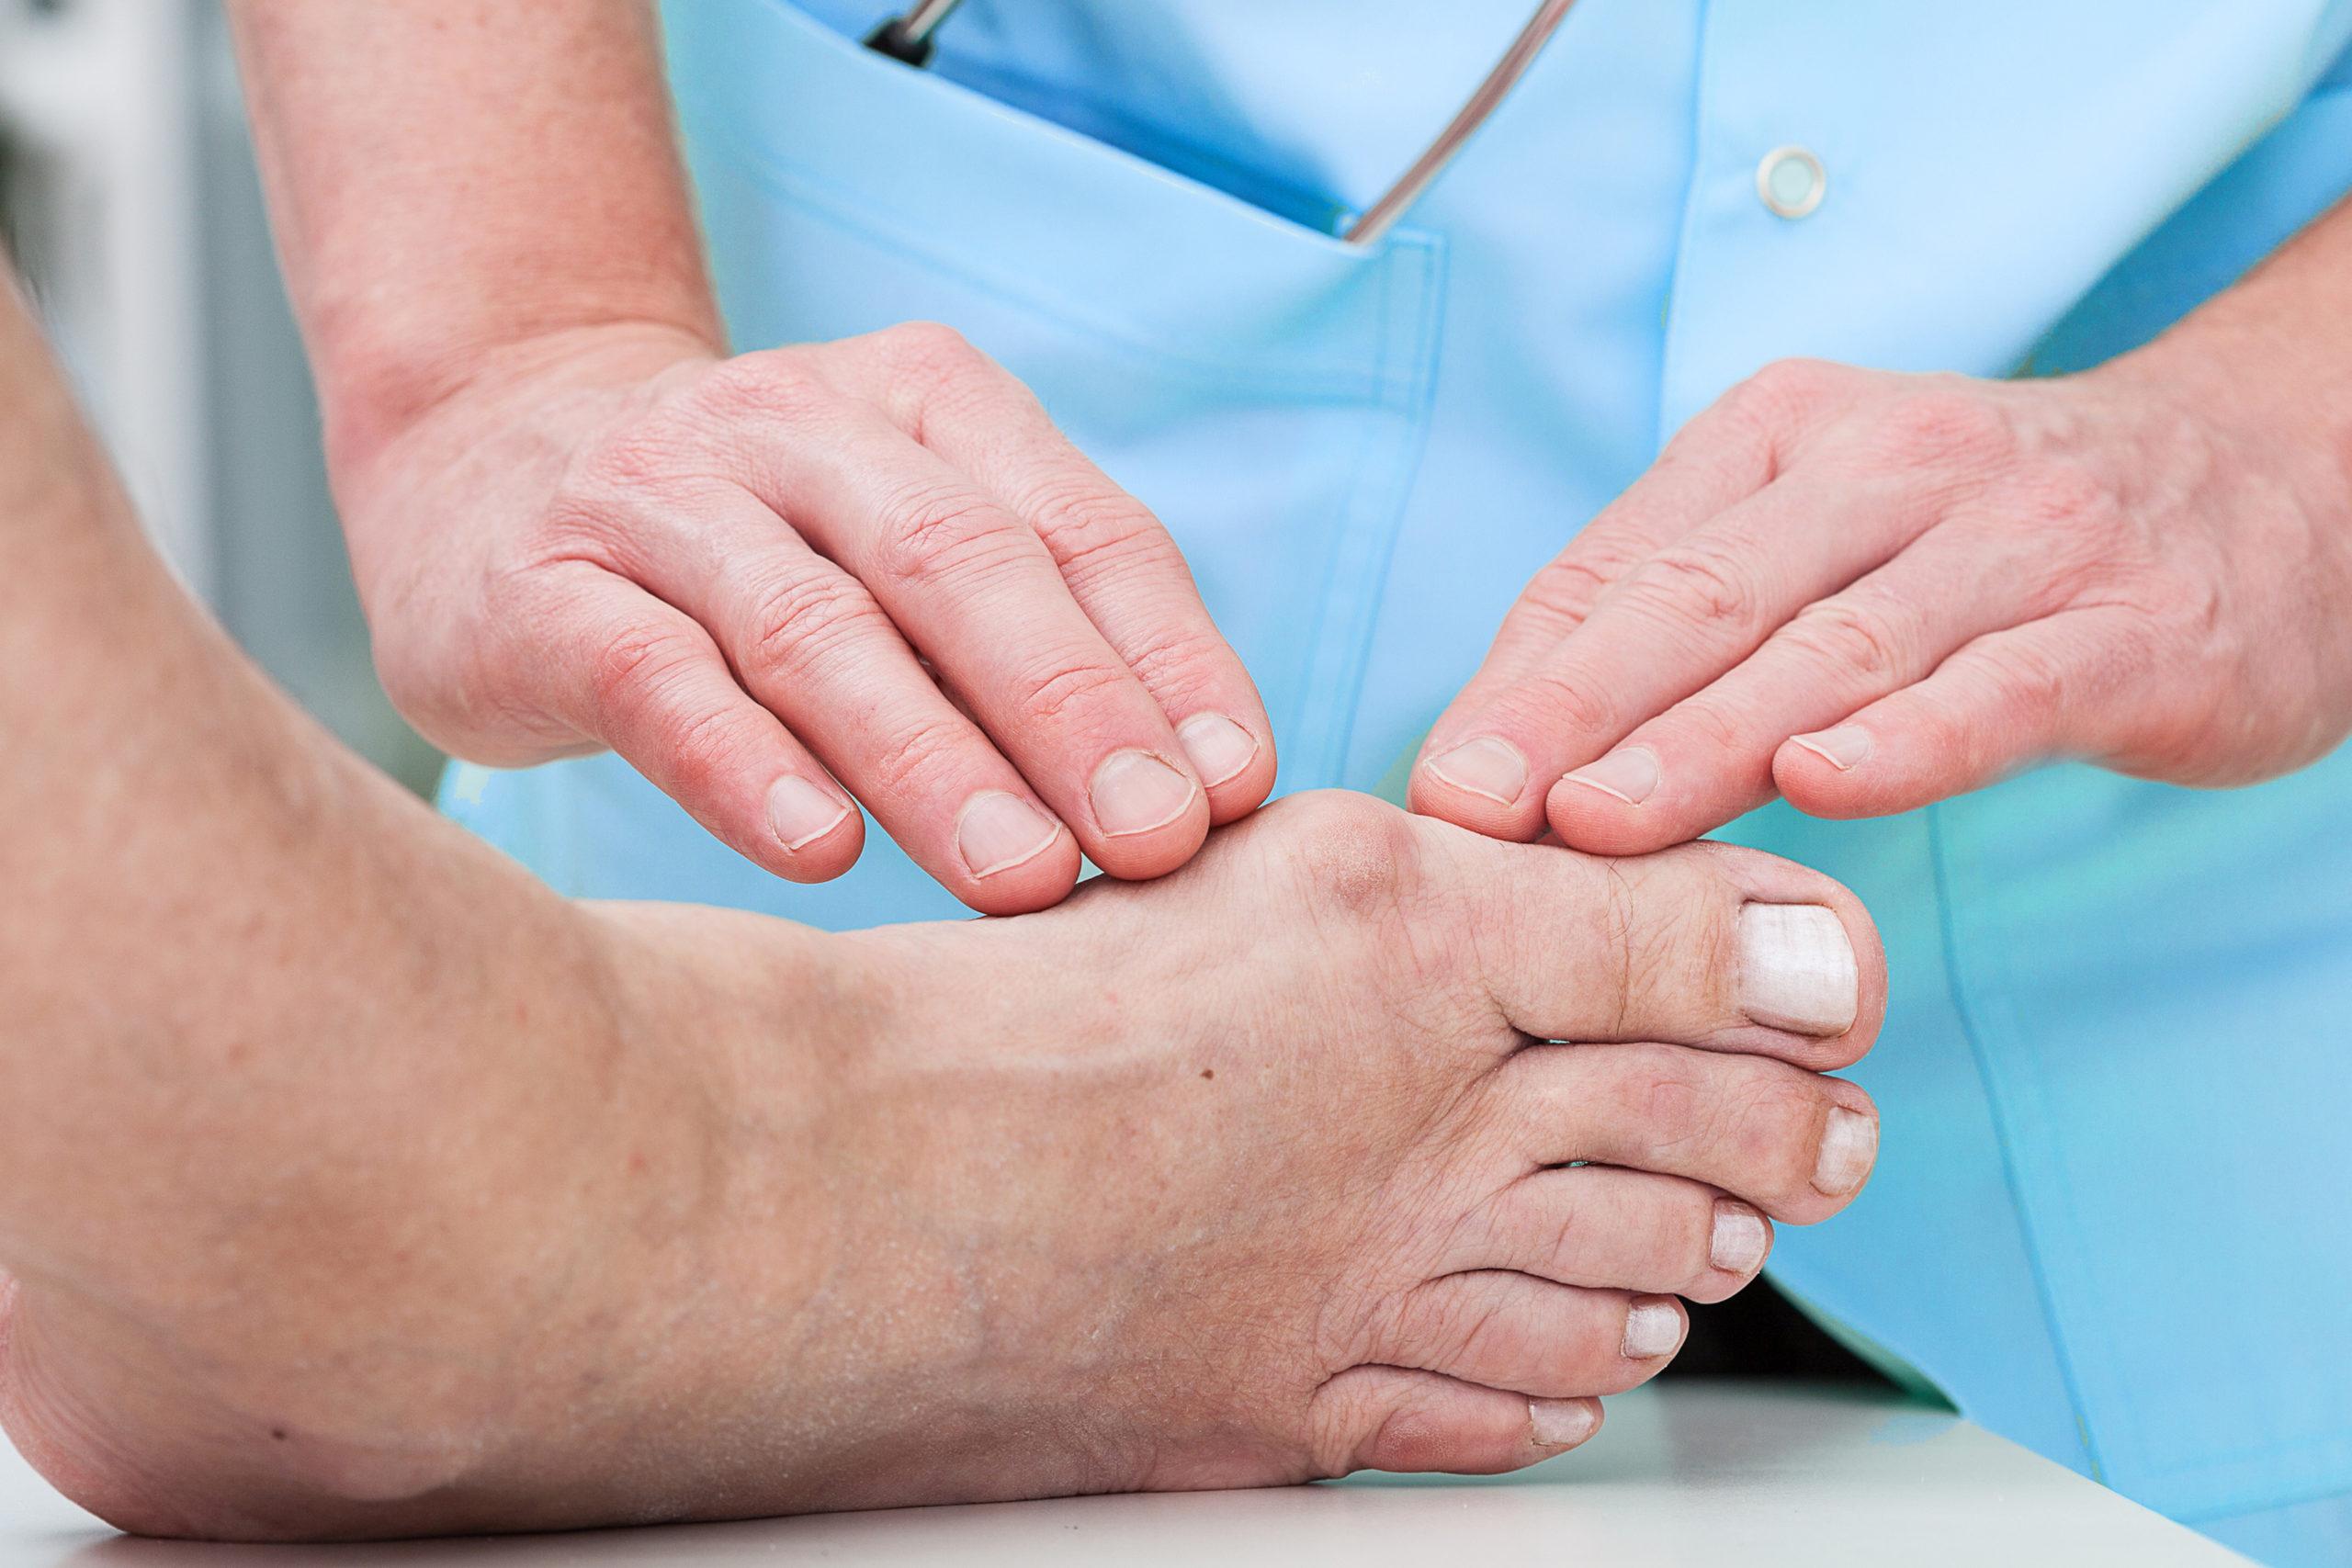 Gout: Definition, Causes, and Treatment